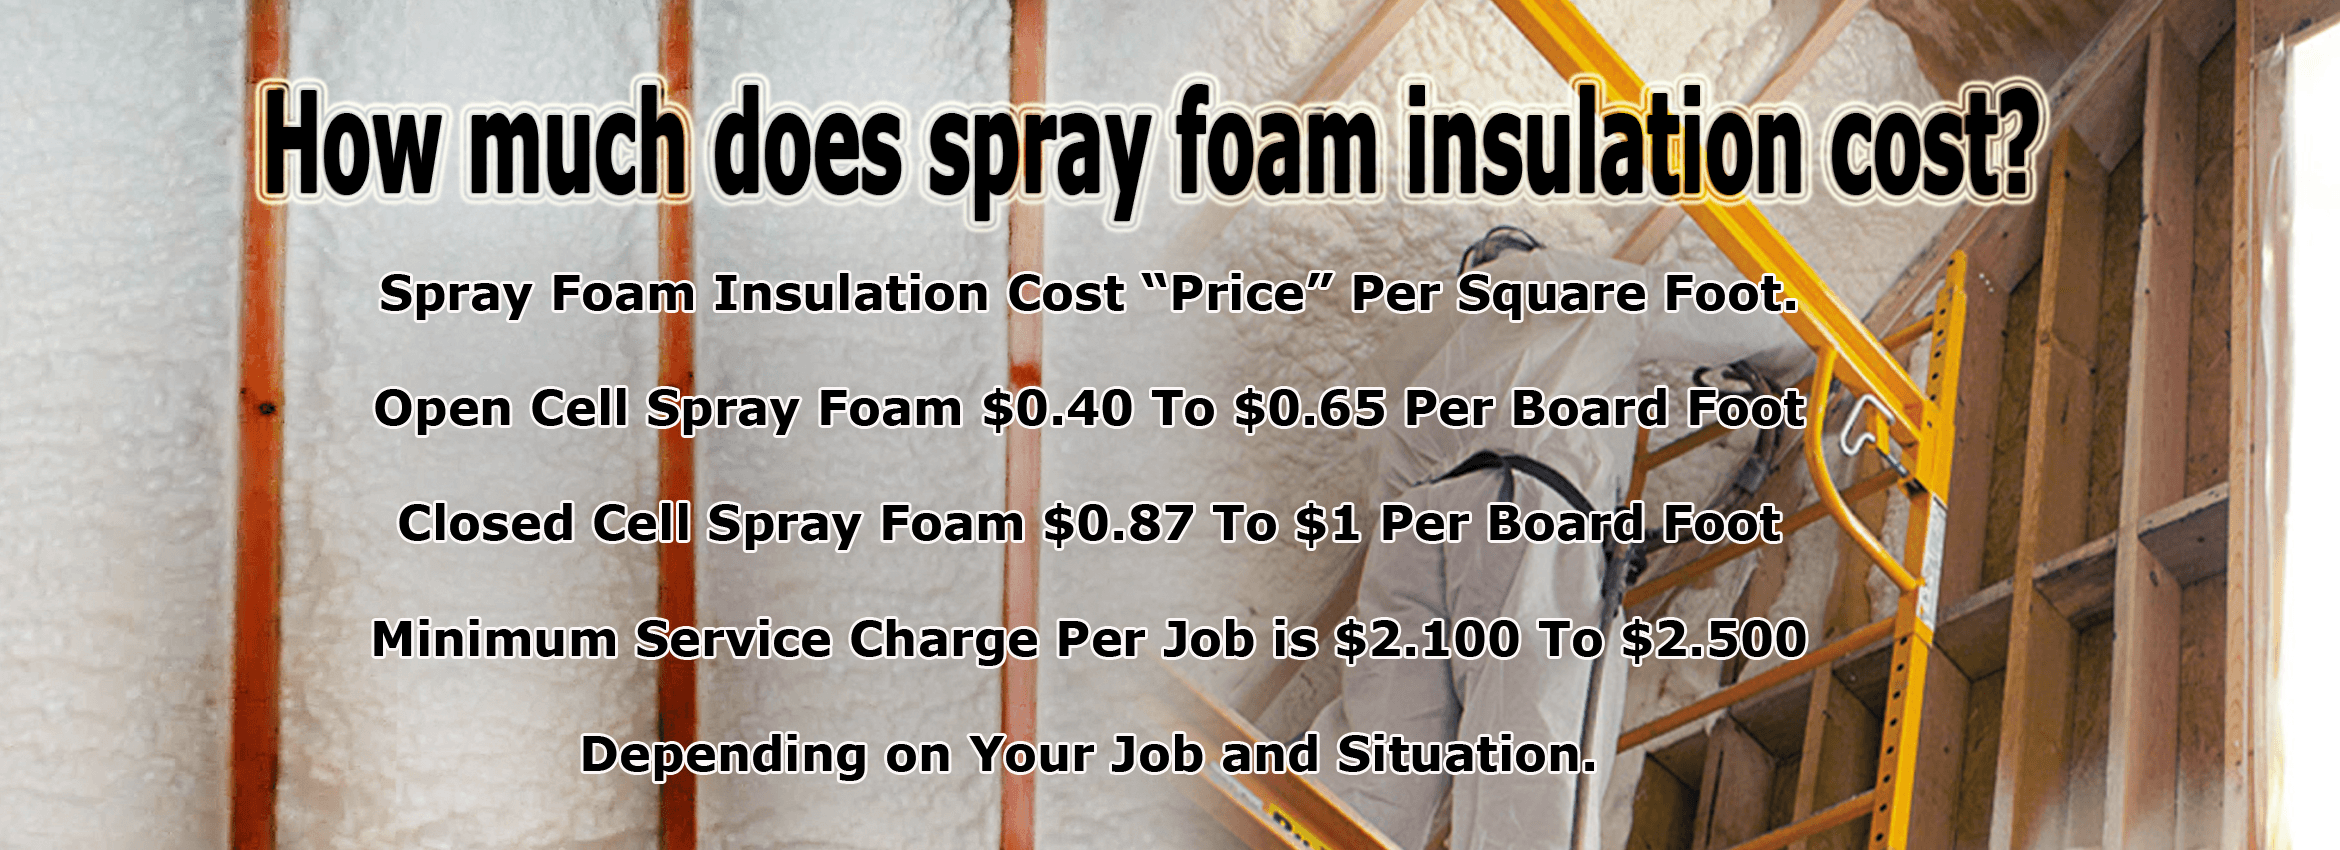 How-much-does-spray-foam-insulation-cost Spray Foam Insulation Blog | News |Architects | Contractors | Homeowners